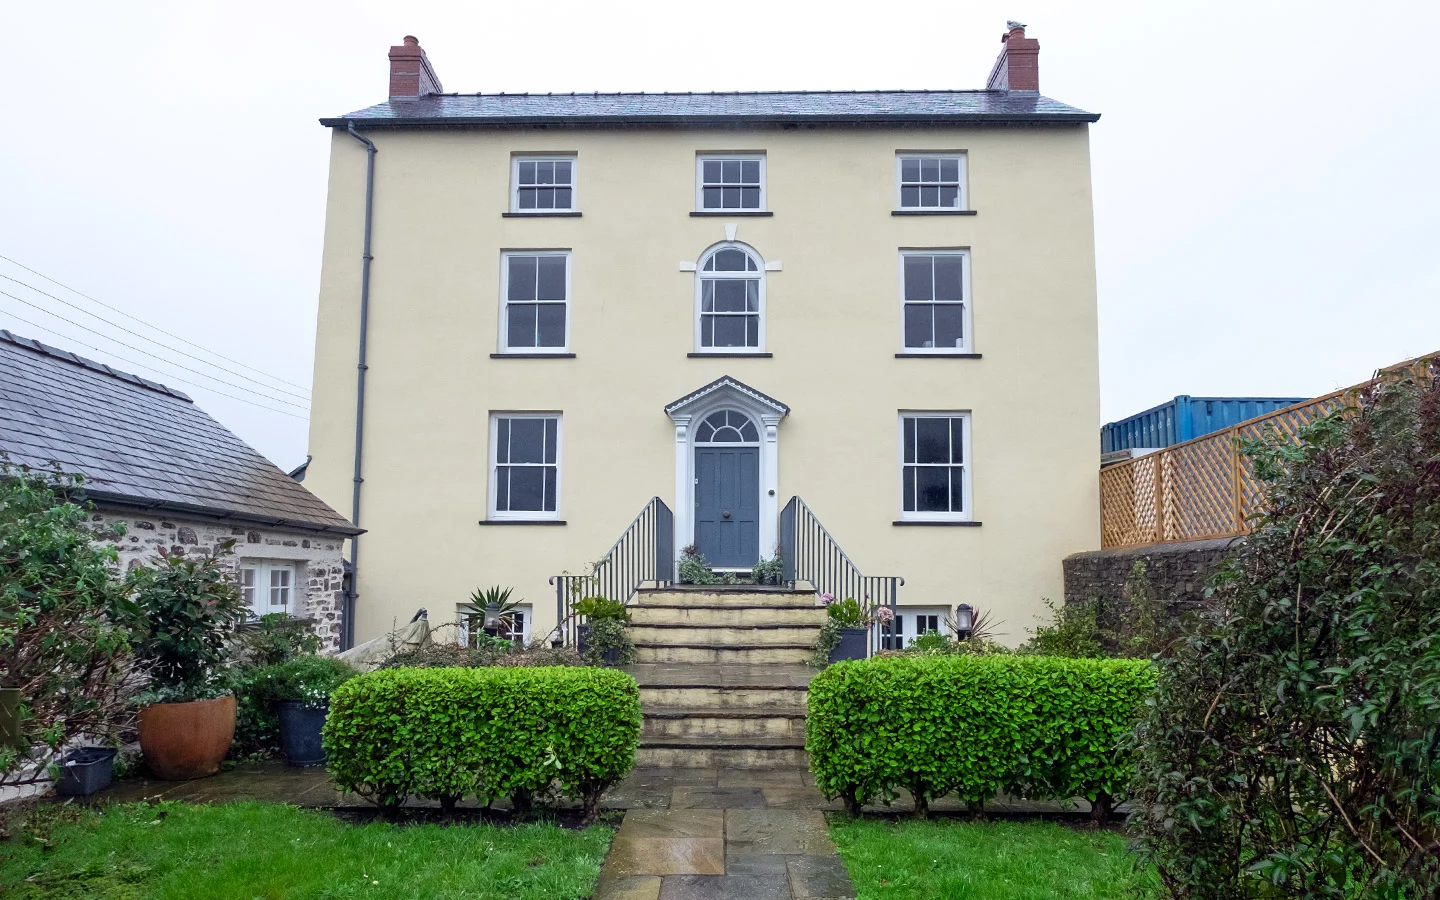 Seaview – Dylan Thomas' house for rent in Laugharne, South Wales